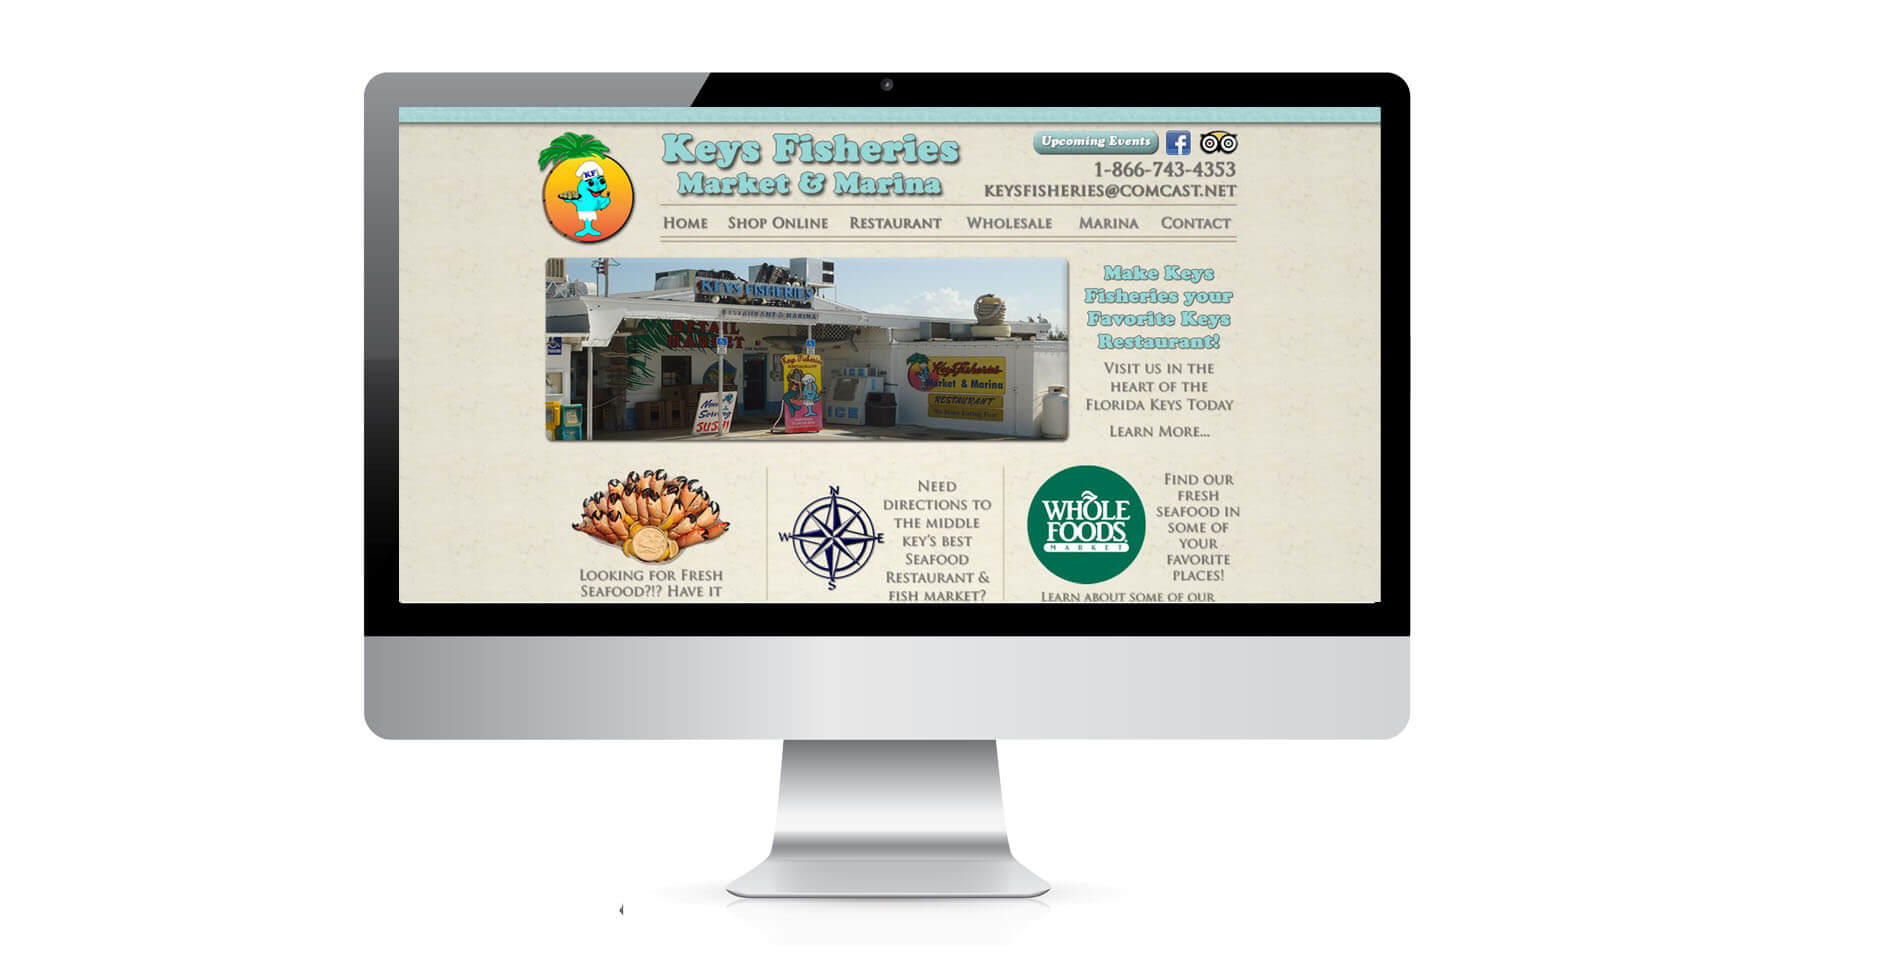 An image of the web design of Keys Fisheries, website created by Not Fade Away Marketing